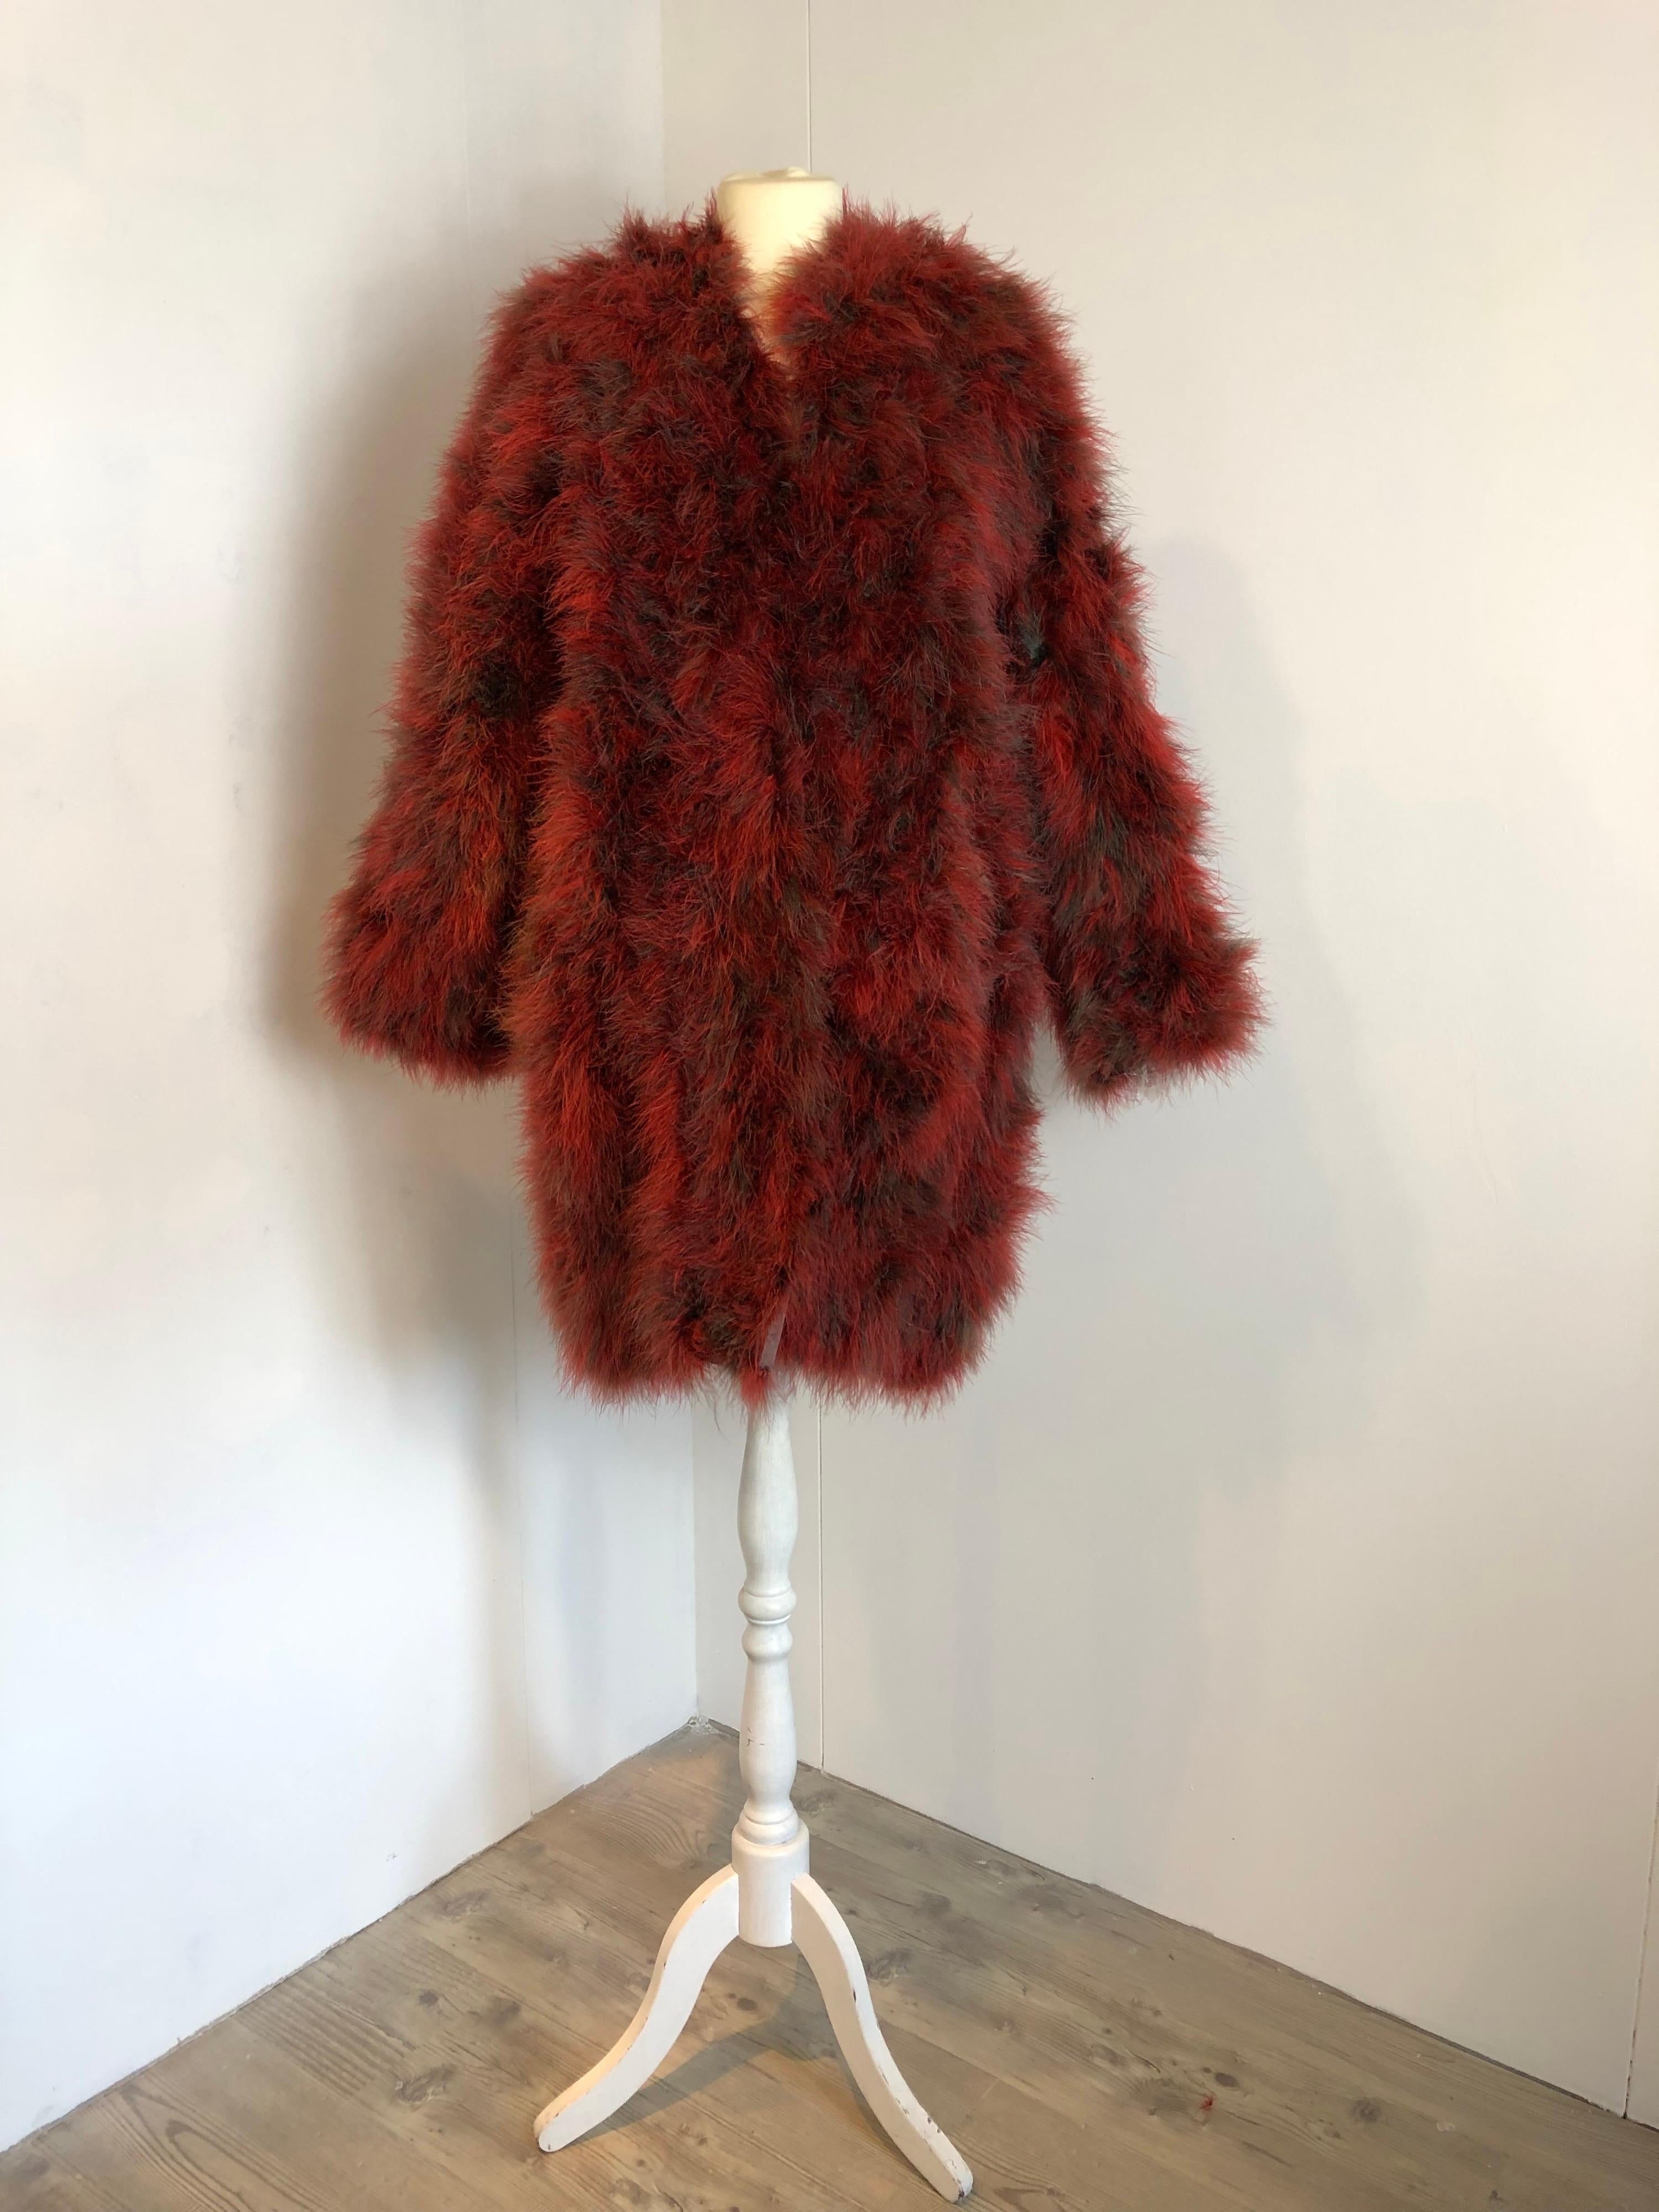 Saint Laurent , Rive Gauche fur. About 70s/80s.
100% feathers, lining 100% acetate. 
Featuring 2 frontal pockets and clips closure. 
Size 40 FR.
Measurements:
Shoulders 44 cm
Bust 54 cm
Sleeves 62 cm
Length 94 cm 
Condition: Good - Previously owned